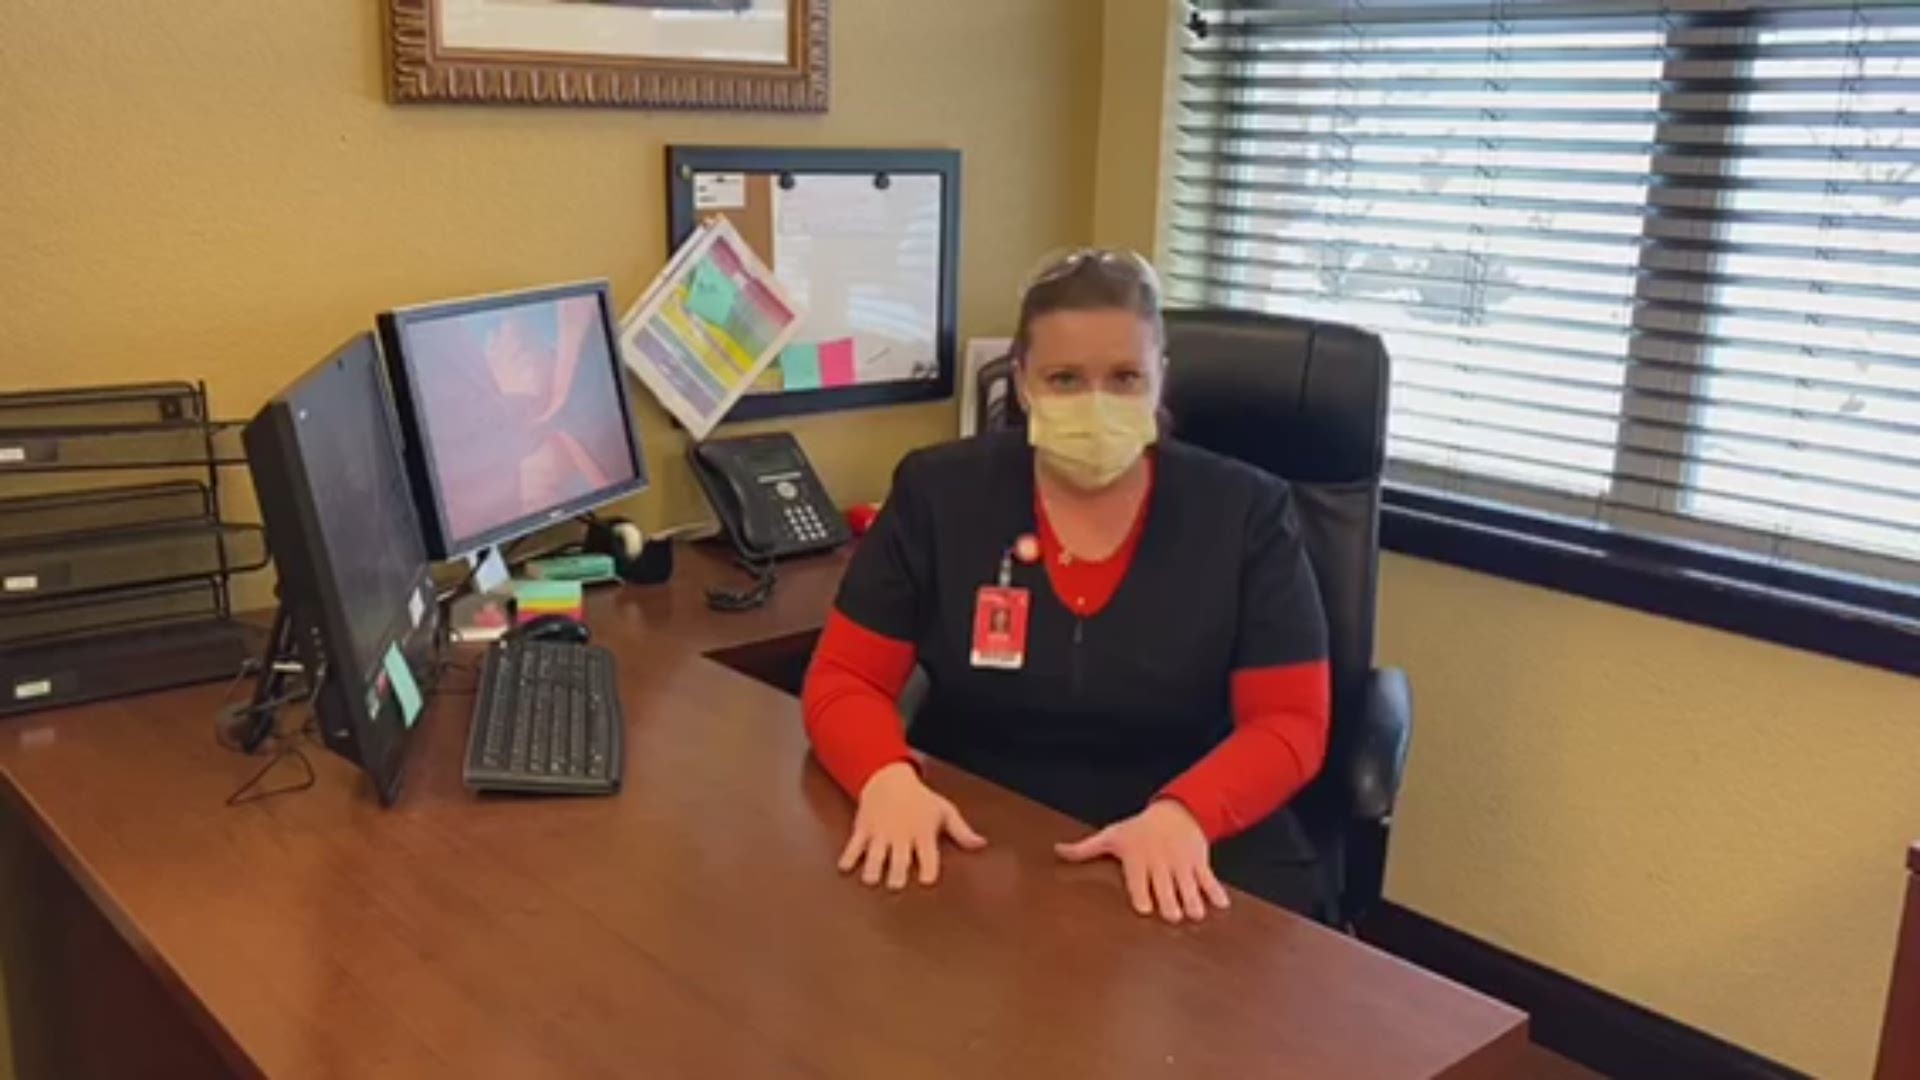 Colorado nurse Kristi McCabe answered a few questions about working on the front line of the COVID-19 pandemic.